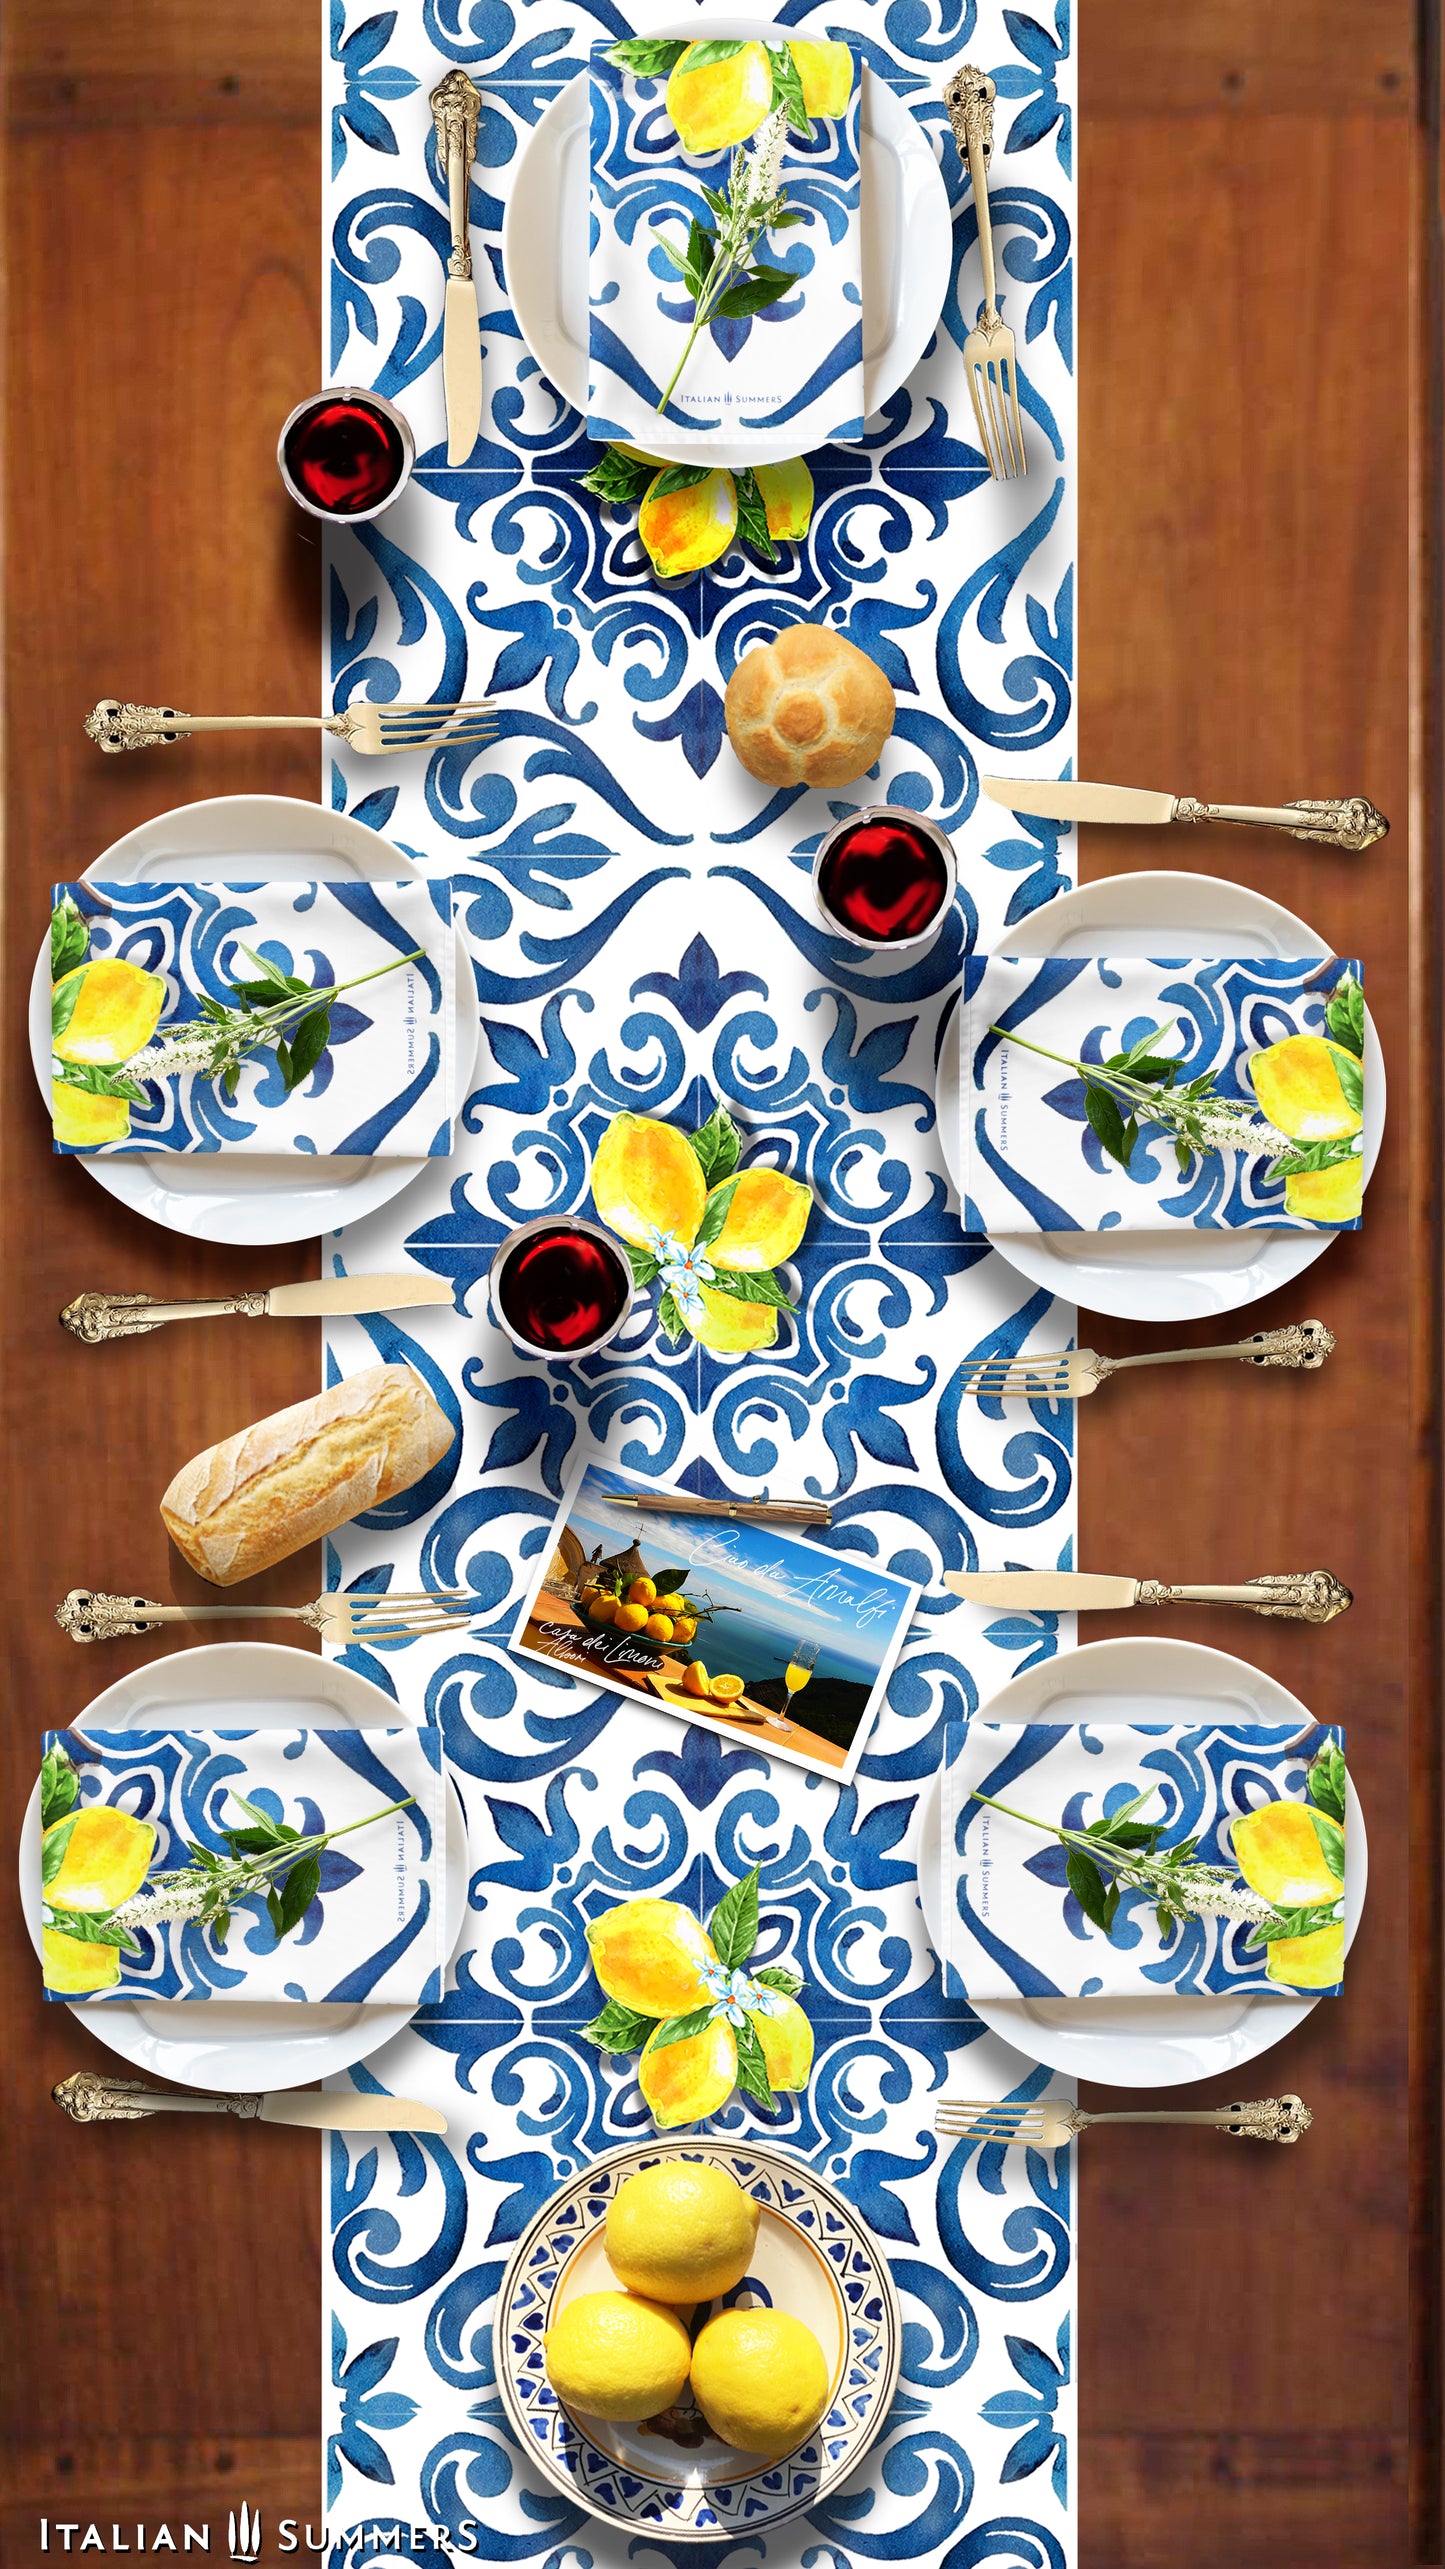 Italy inspired table runner printed with a blue and white pattern  of  Italian maiolica tiles and bundles of Sorrento lemons with flowers. A true Amalfi Coast decorational touch to any diningroom. Made by Italian Summers.